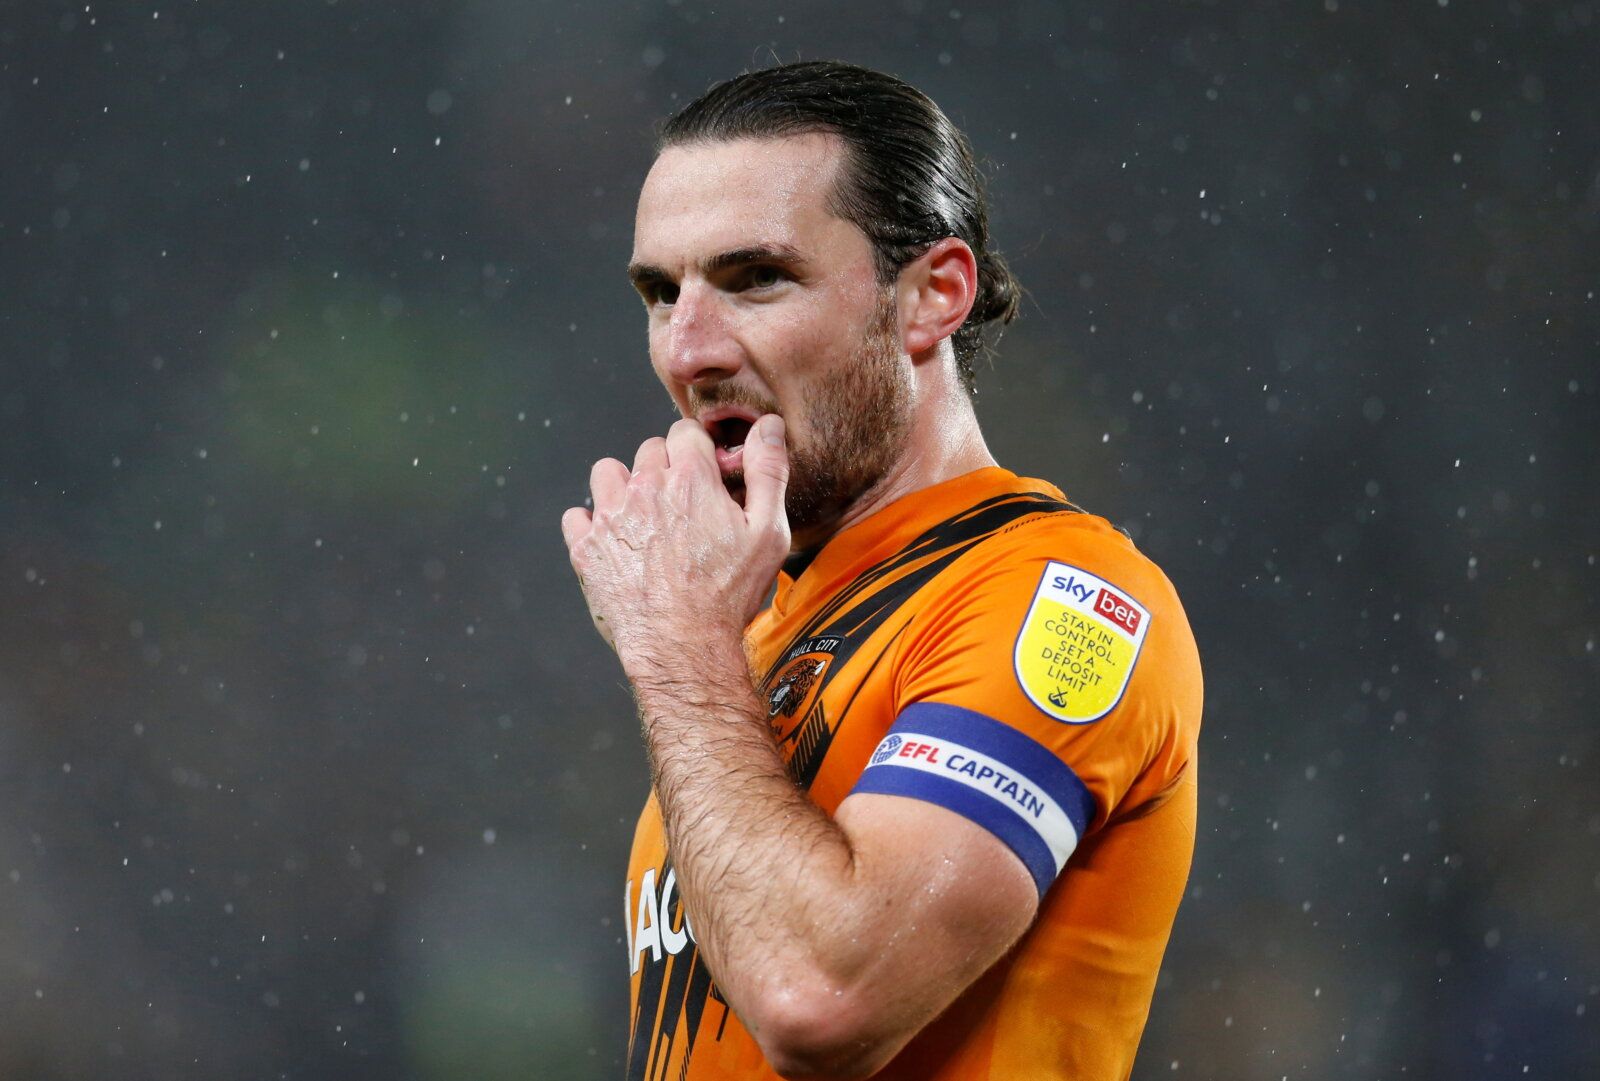 Soccer Football - Championship - Hull City v Blackpool - KCOM Stadium, Hull, Britain - September 28, 2021  Hull City's Lewie Coyle  Action Images/Ed Sykes  EDITORIAL USE ONLY. No use with unauthorized audio, video, data, fixture lists, club/league logos or 